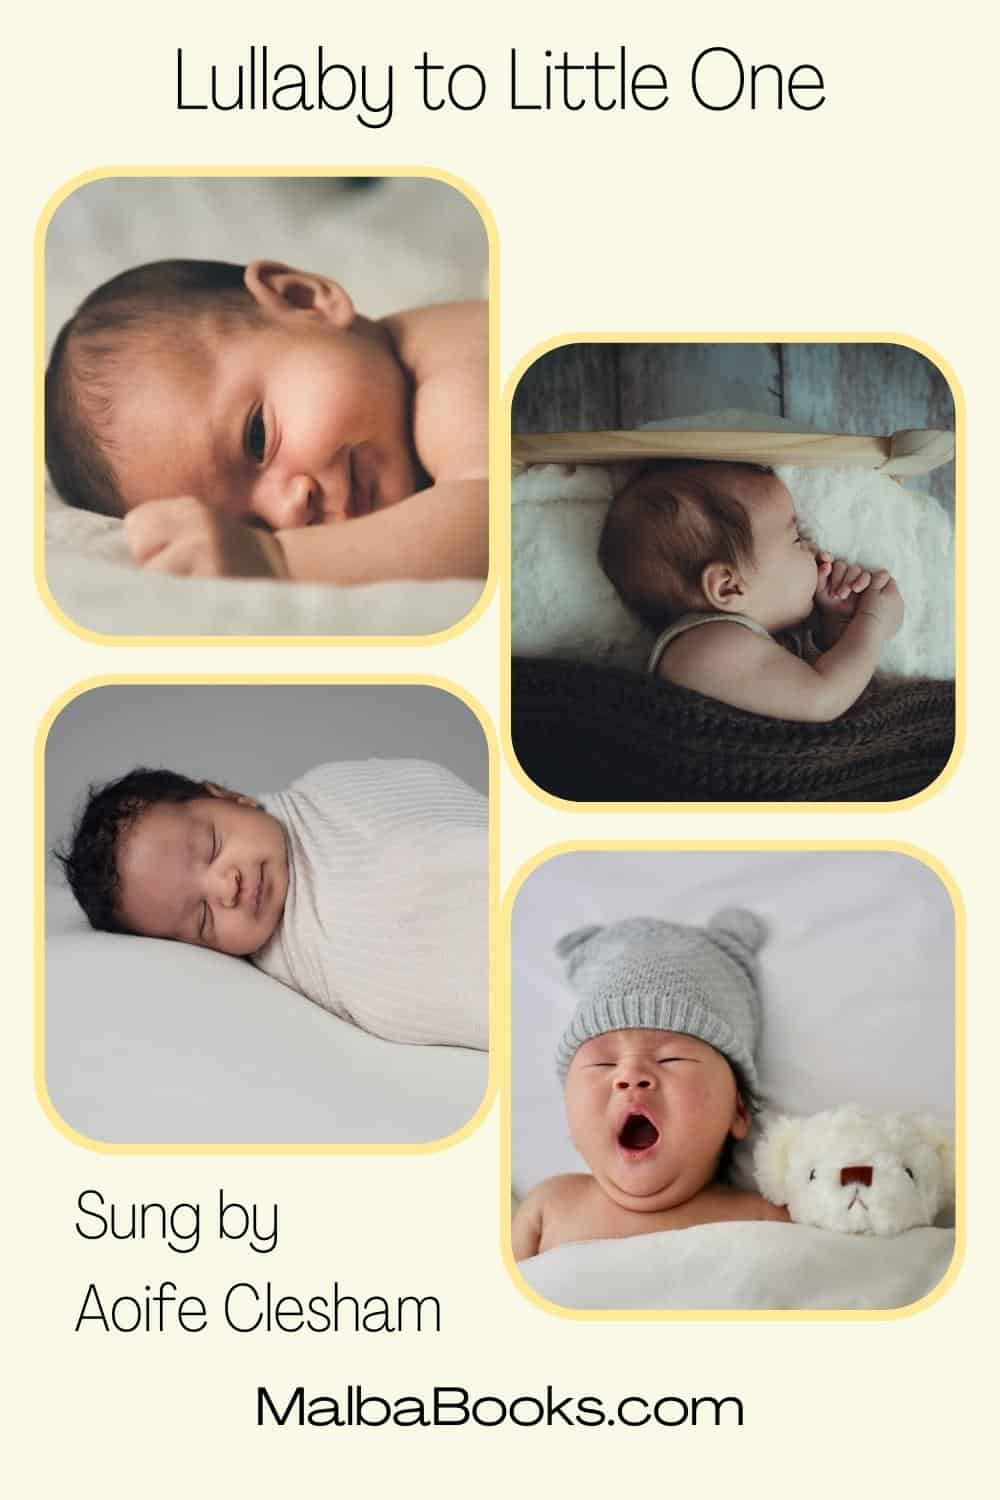 Text says 'Lullaby to Little One sung by Aoife Clesham. Images show four small infants, two of whom are asleep, one is yawning and the fourth is lying on his/her side and looking at the camera.